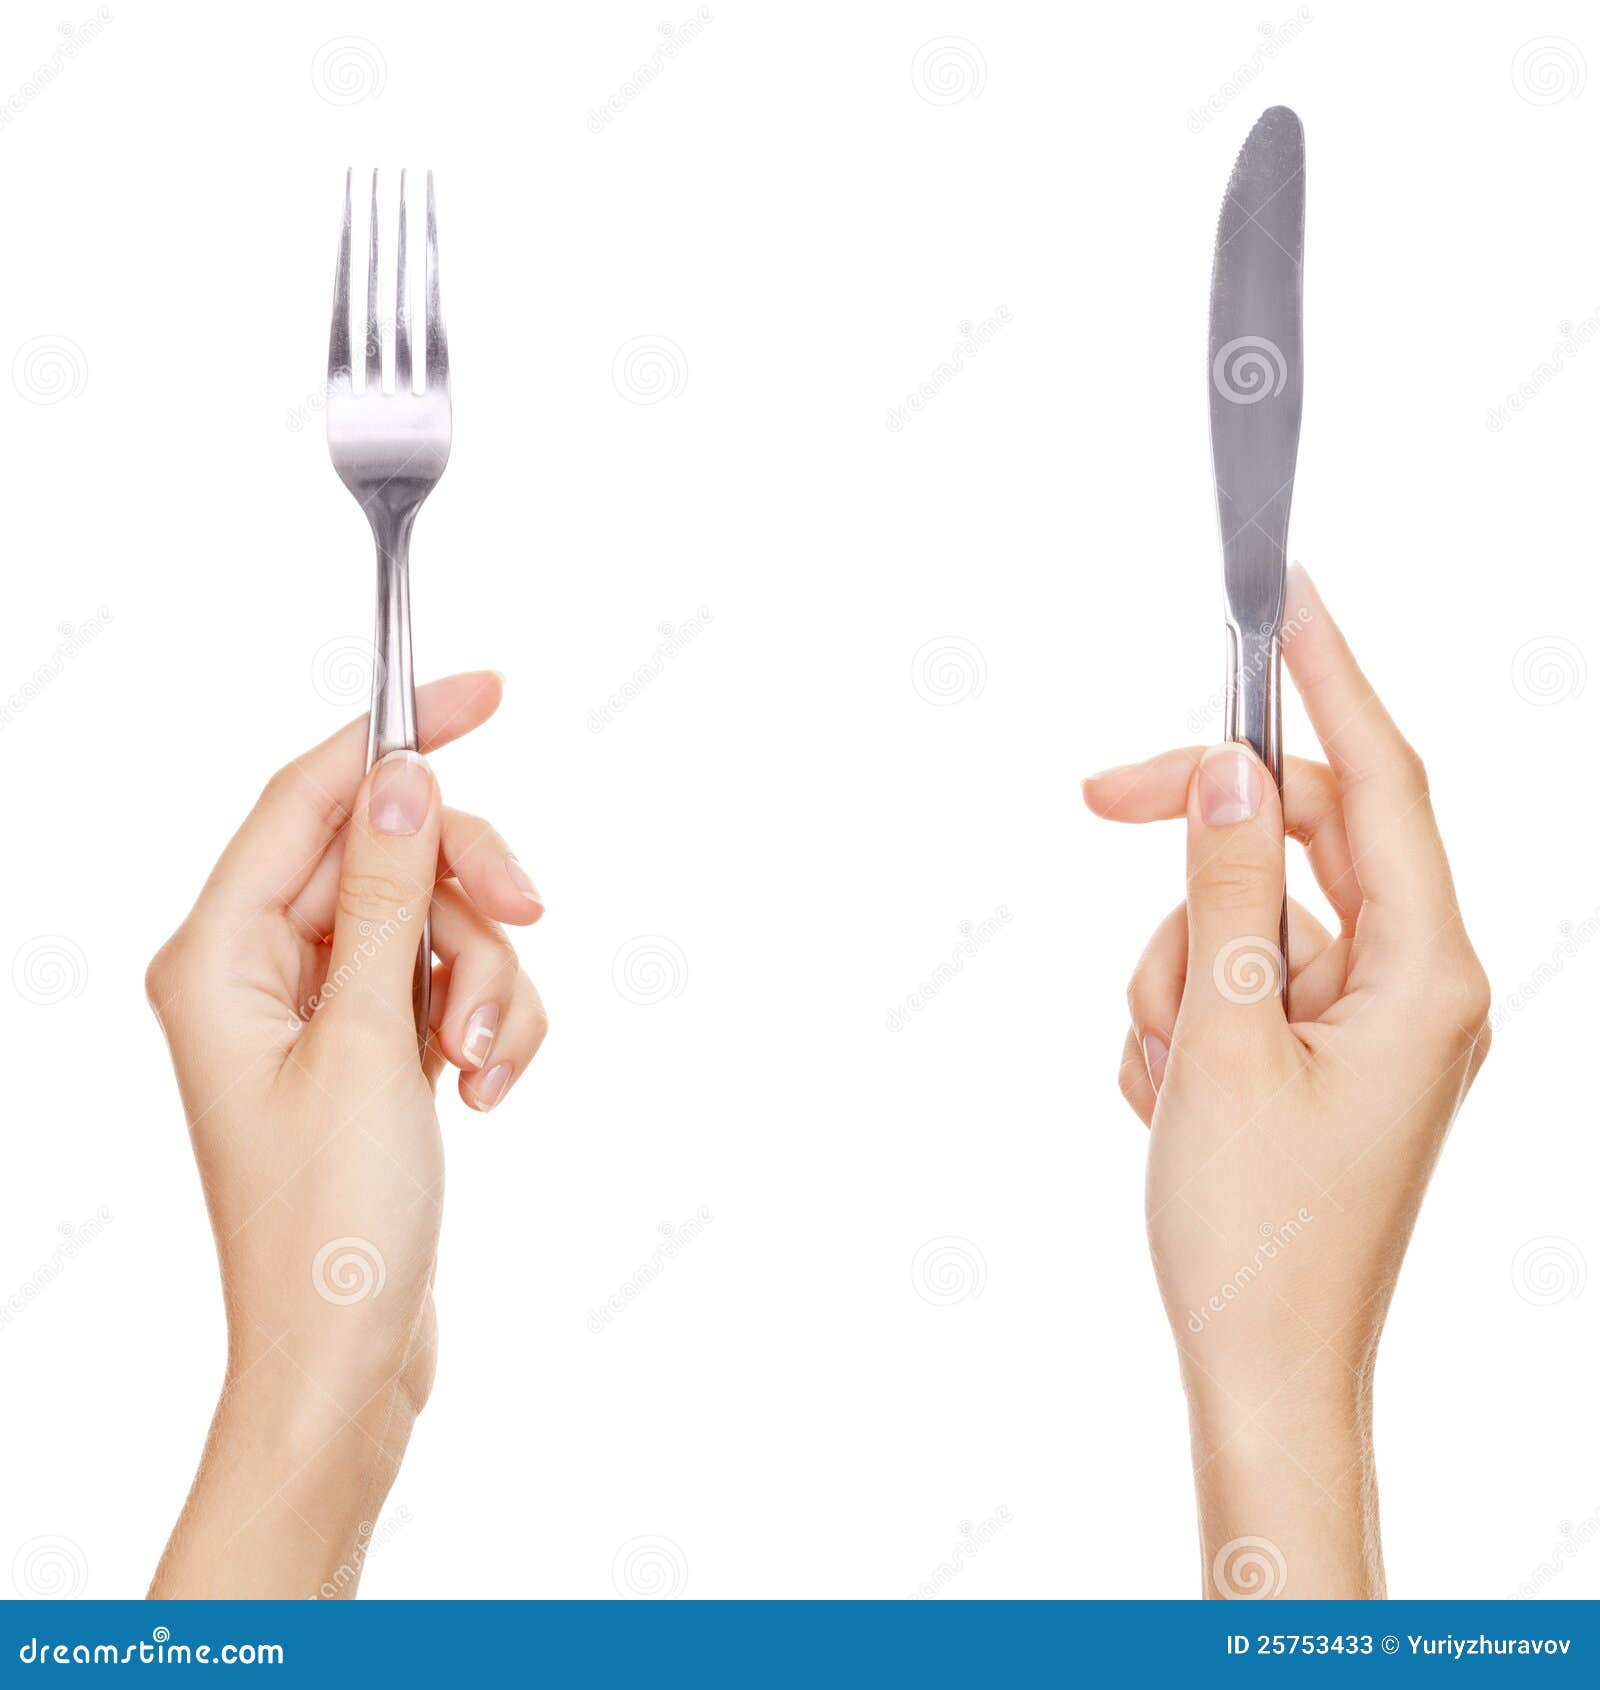 a knife and fork being held by womans hands.